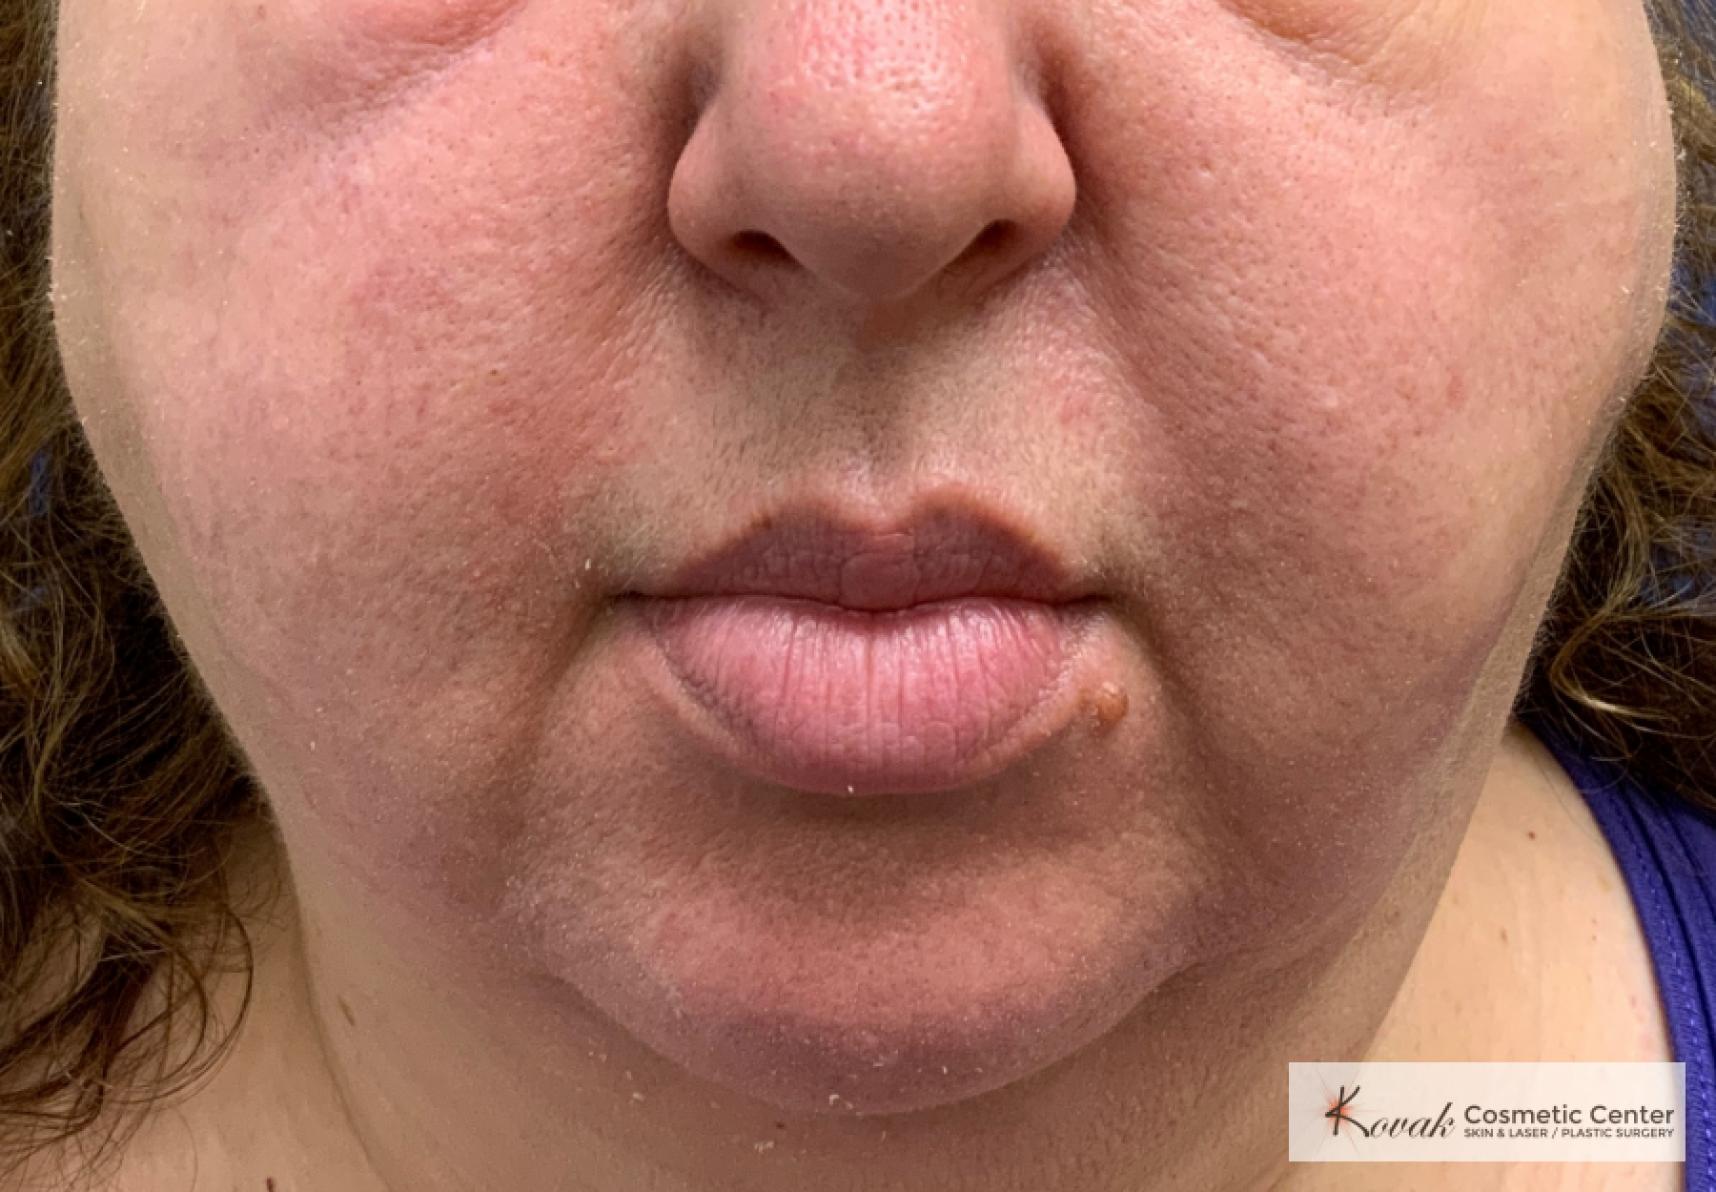 Laser Liposuction using the Vaser system of the jawline on a 52 year old female - After  